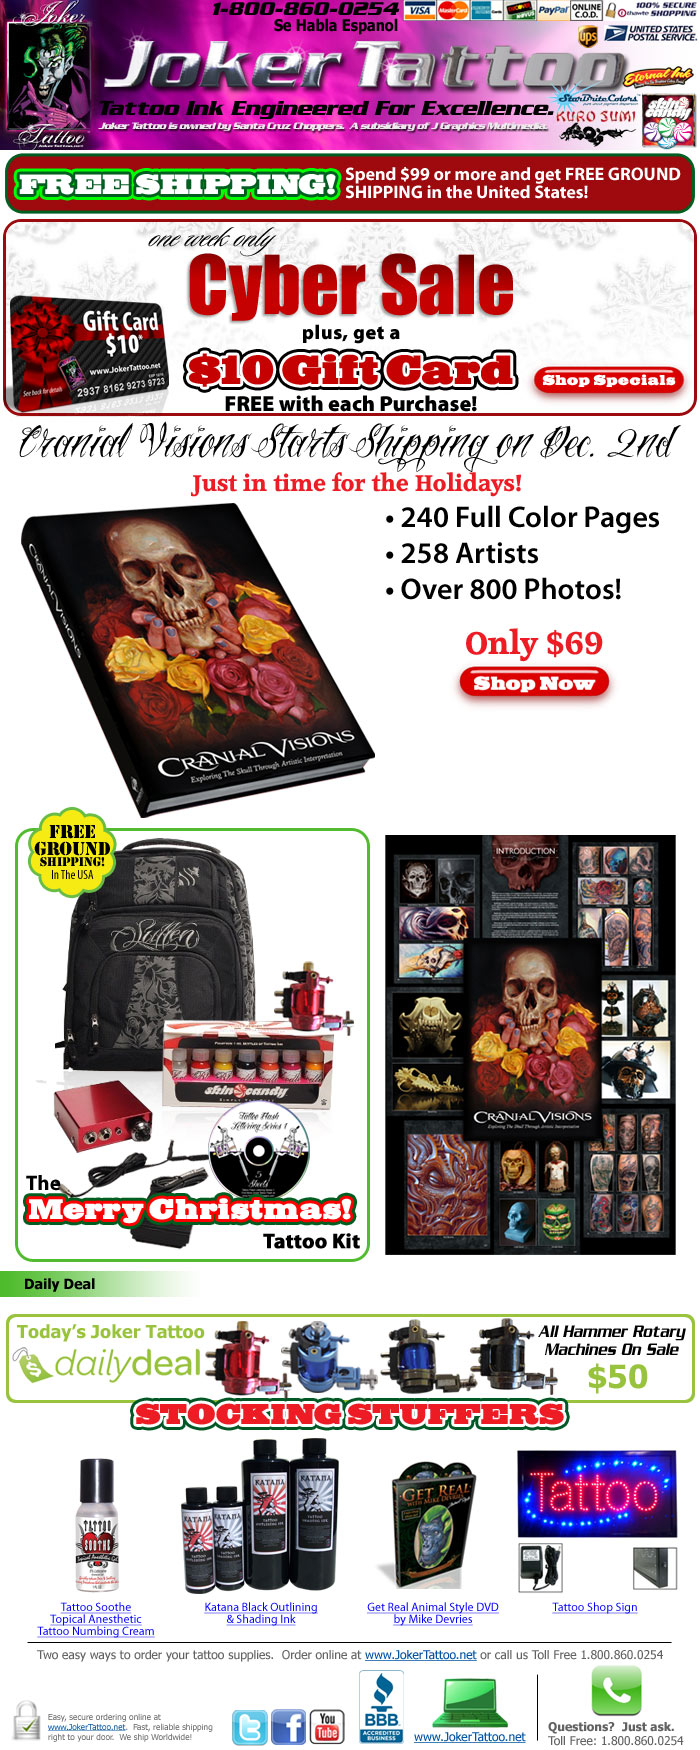 Tattoo Supply Cyber Sale Going On NOW!